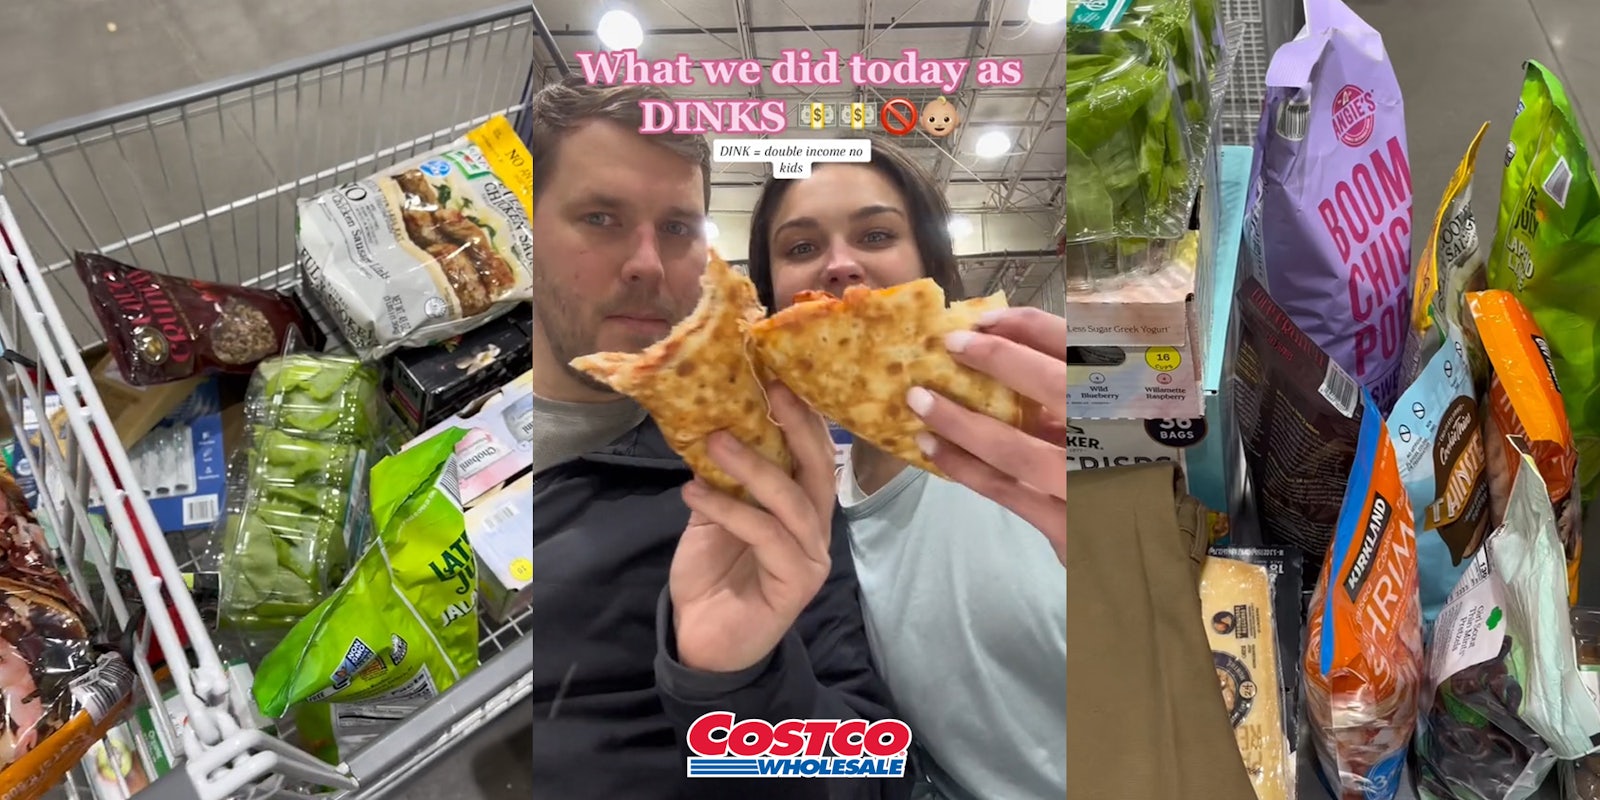 cart full of groceries at Costco (l) couple dinking pizza slices together with caption 'What we did today as DINKS' with Costco logo at bottom (c) Costco groceries at register (r)